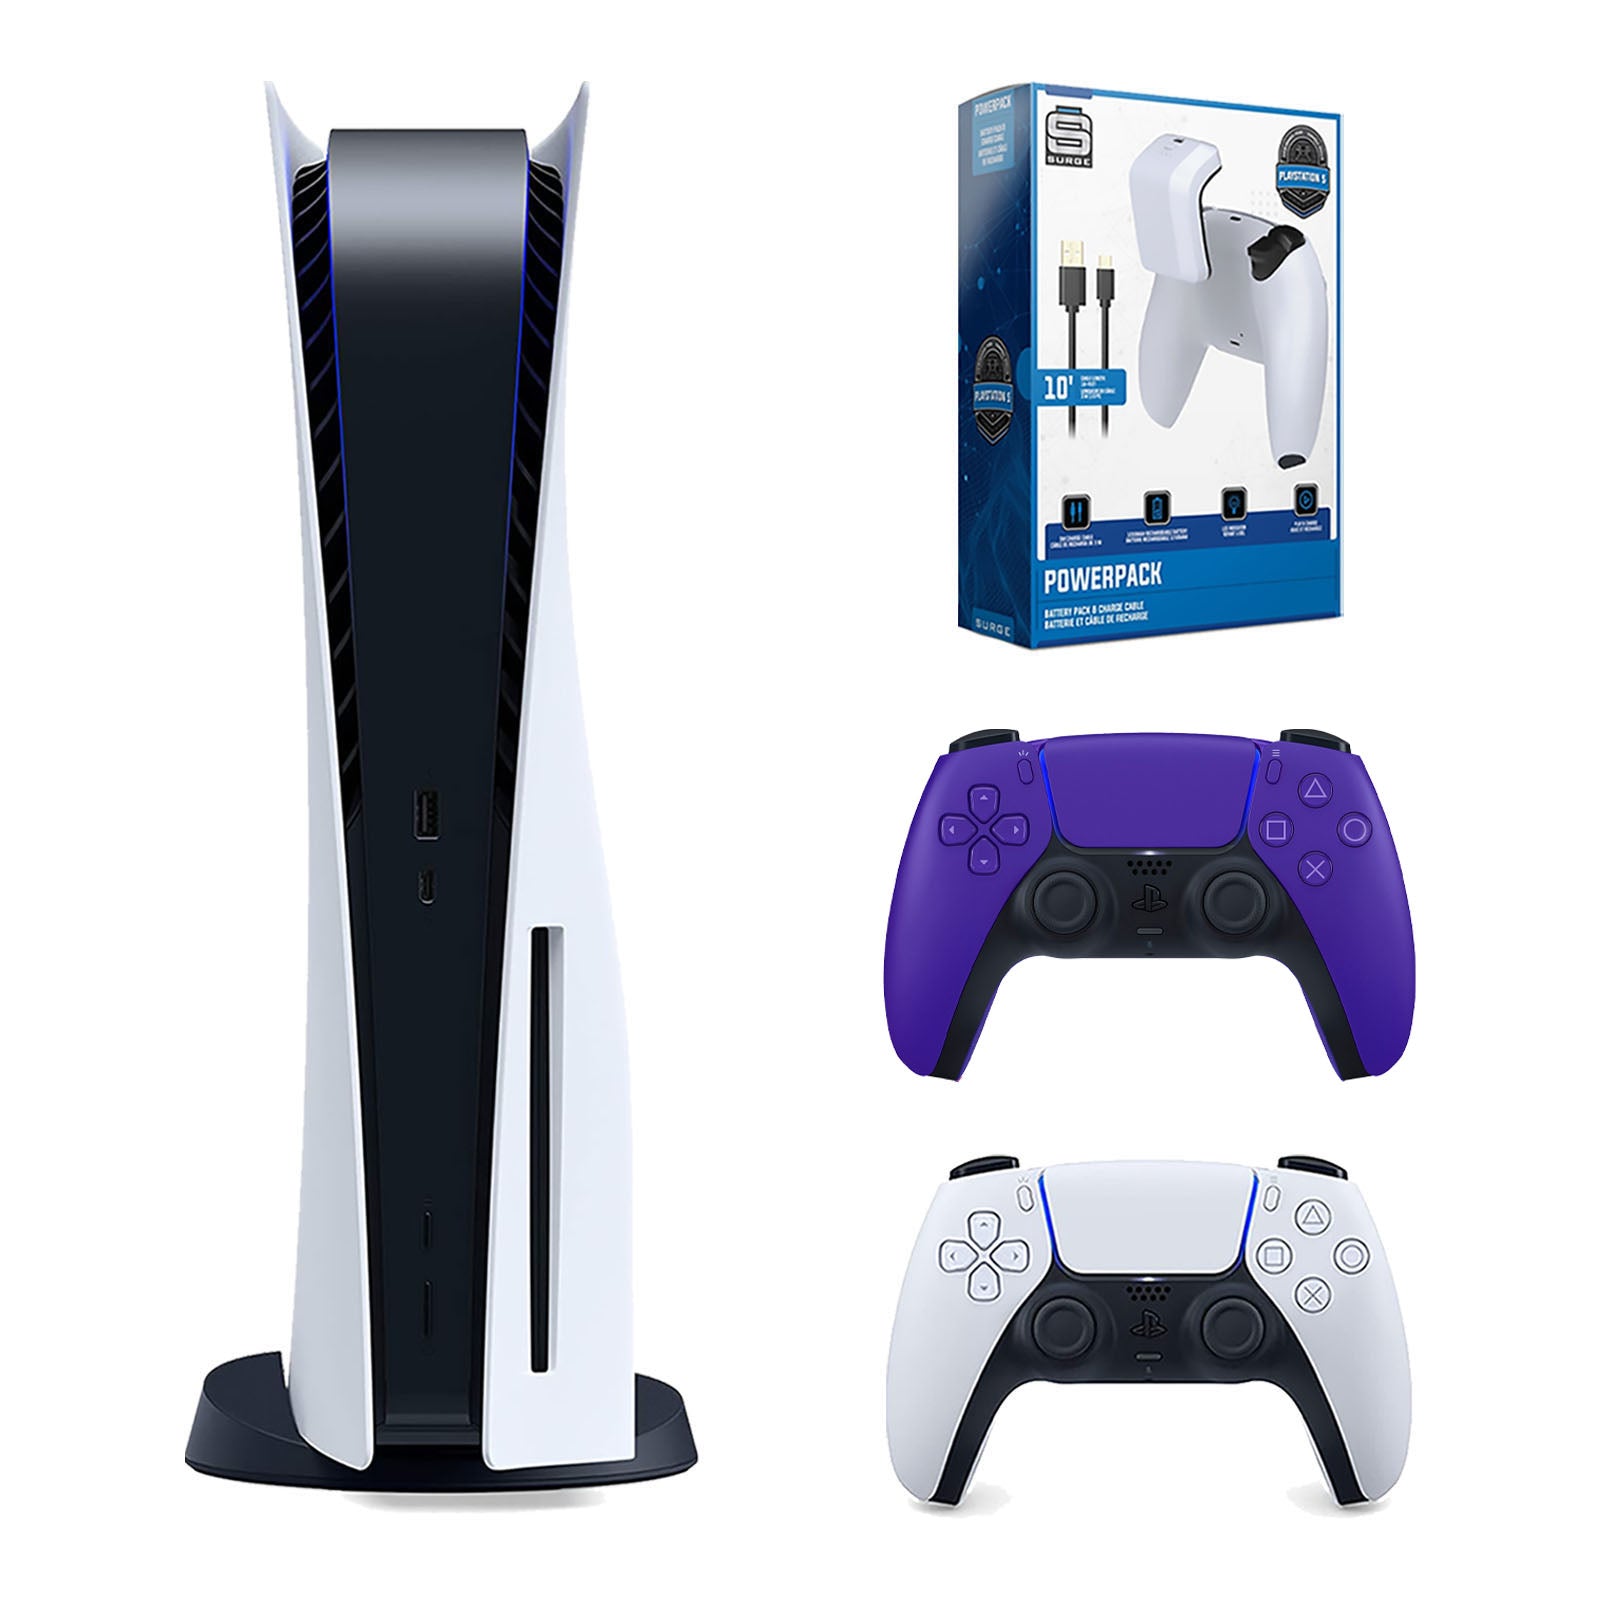 Sony Playstation 5 Disc Version Console with Extra Purple Controller and Surge PowerPack Battery Pack & Charge Cable Bundle - Pro-Distributing